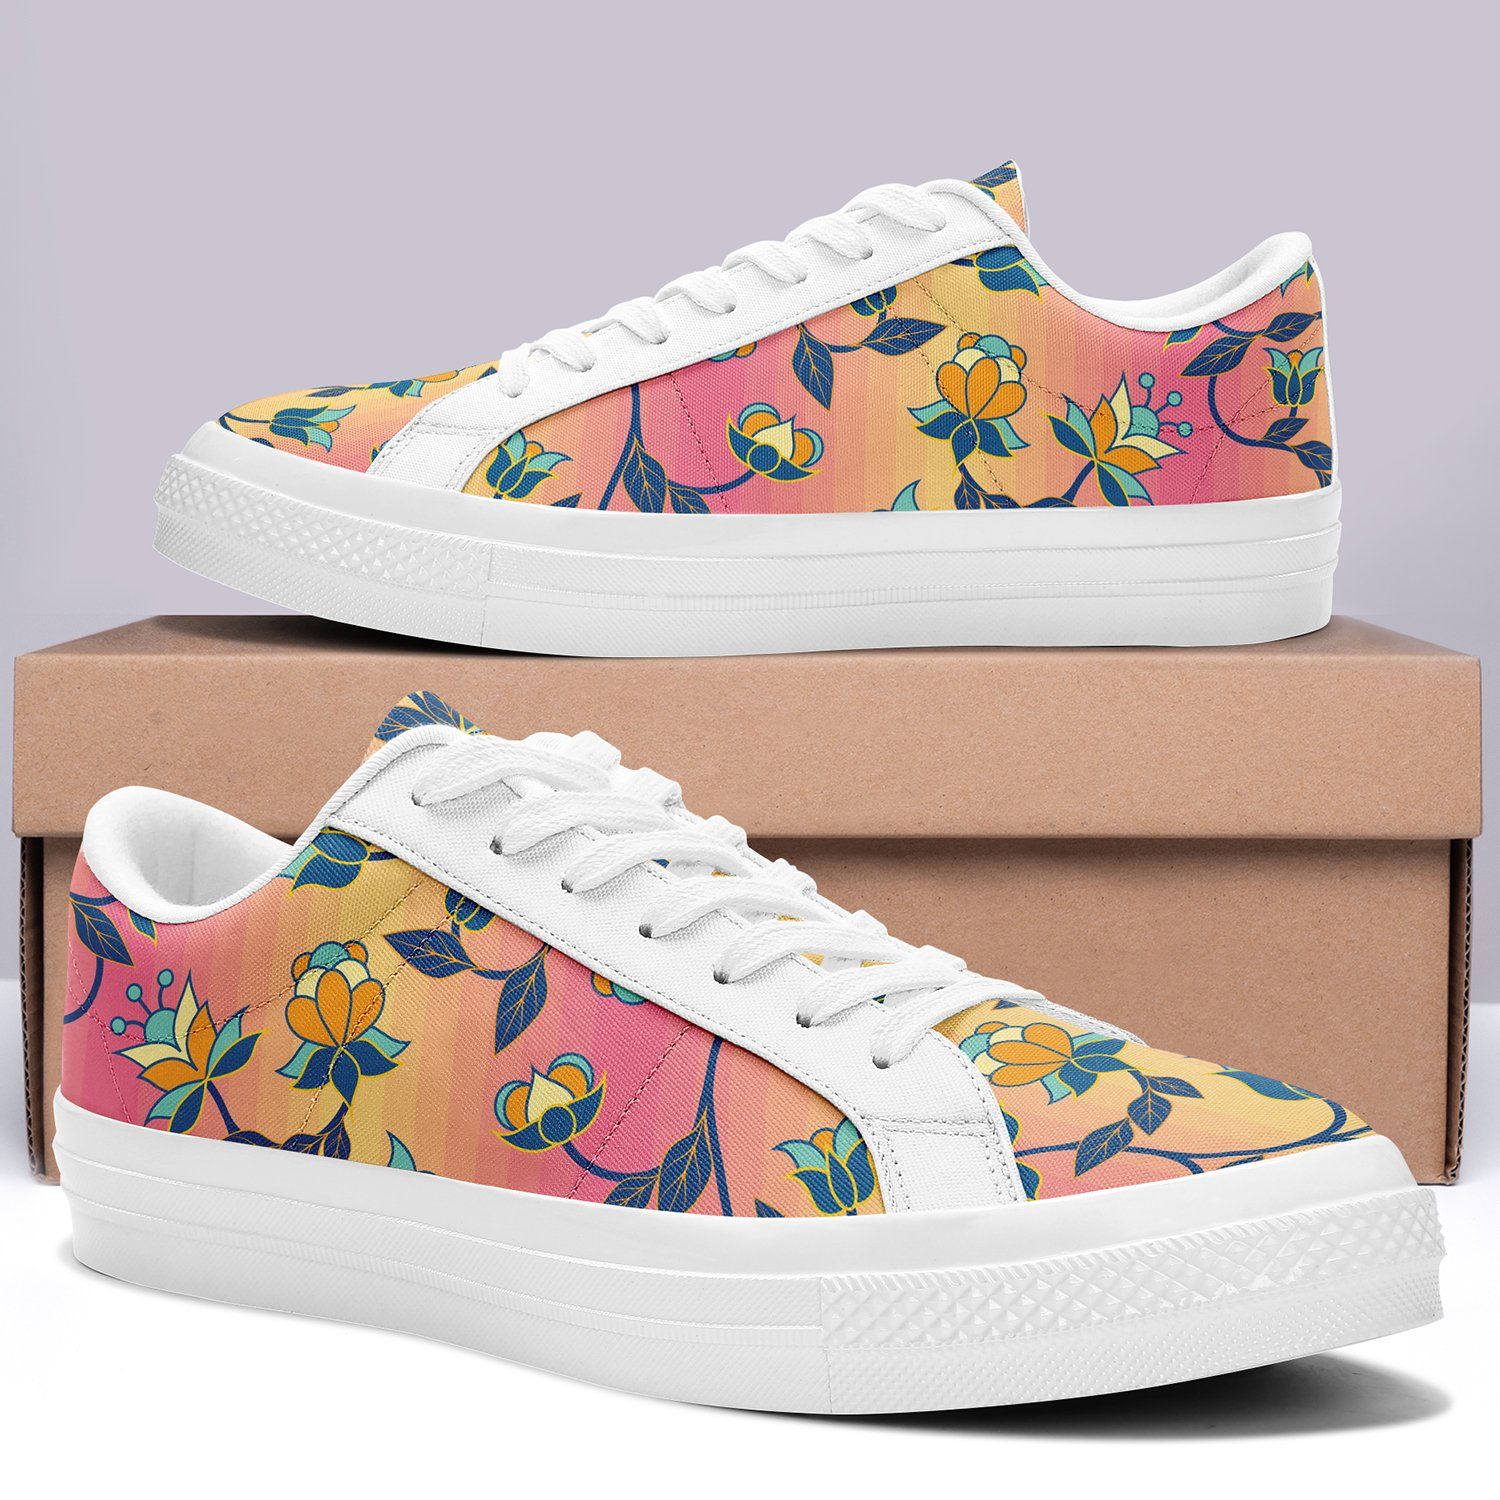 Orange Days Aapisi Low Top Canvas Shoes White Sole aapisi Herman 